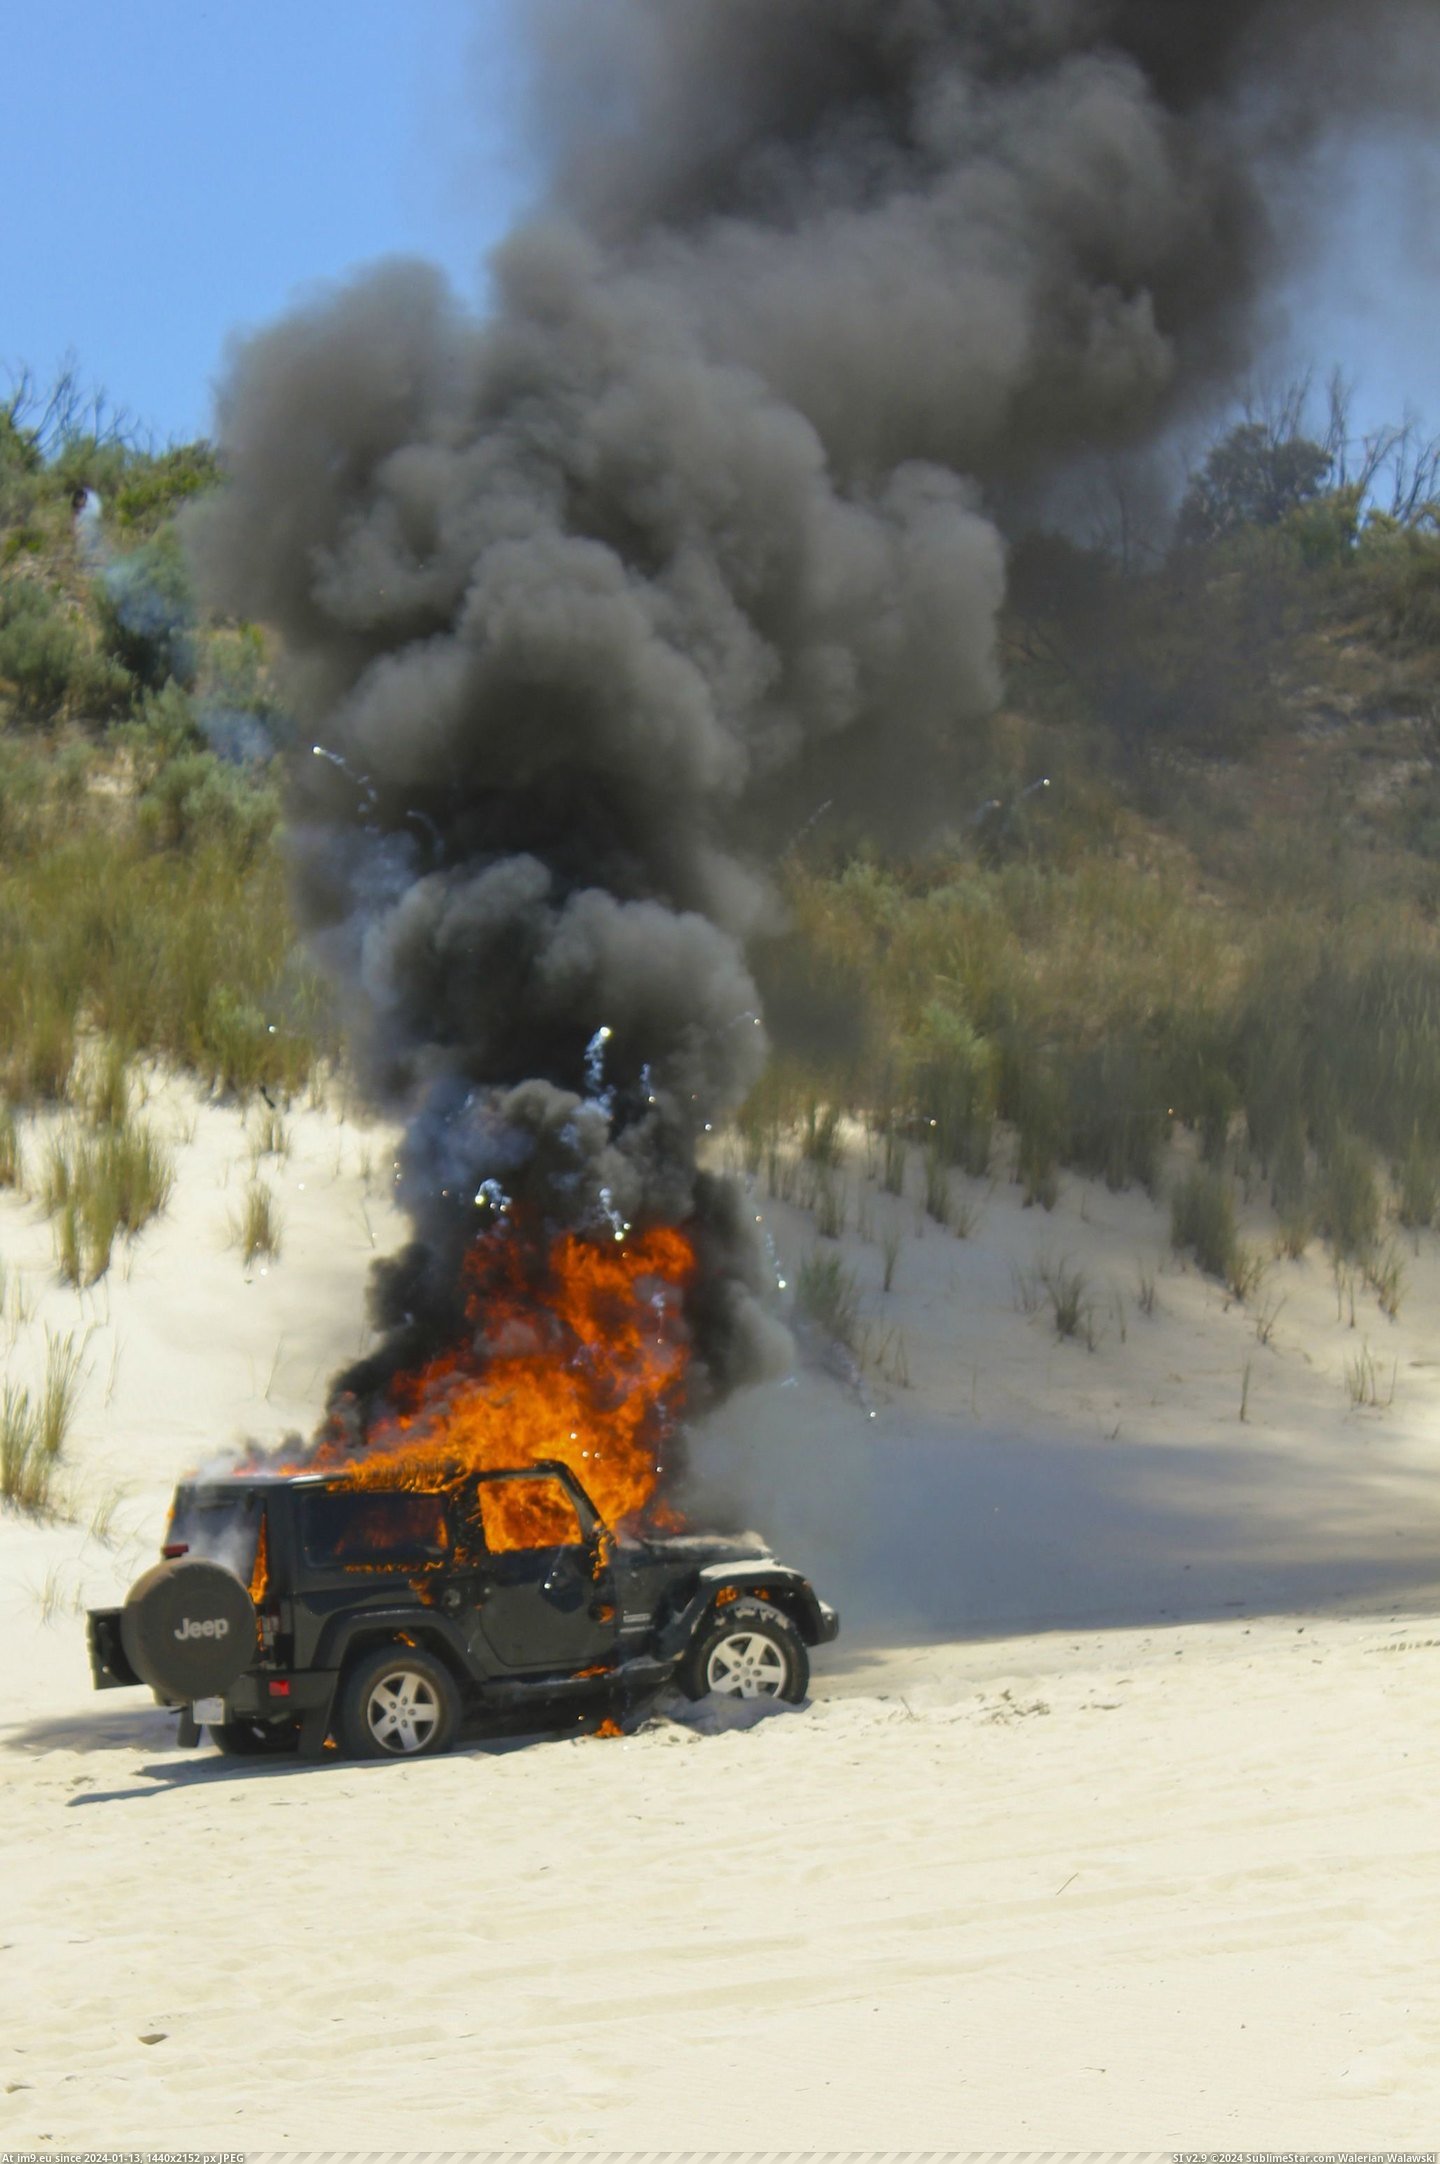 #Interested #Wrangler #Explodes #Jeep [Pics] Wrangler explodes, Jeep not interested 4 Pic. (Image of album My r/PICS favs))